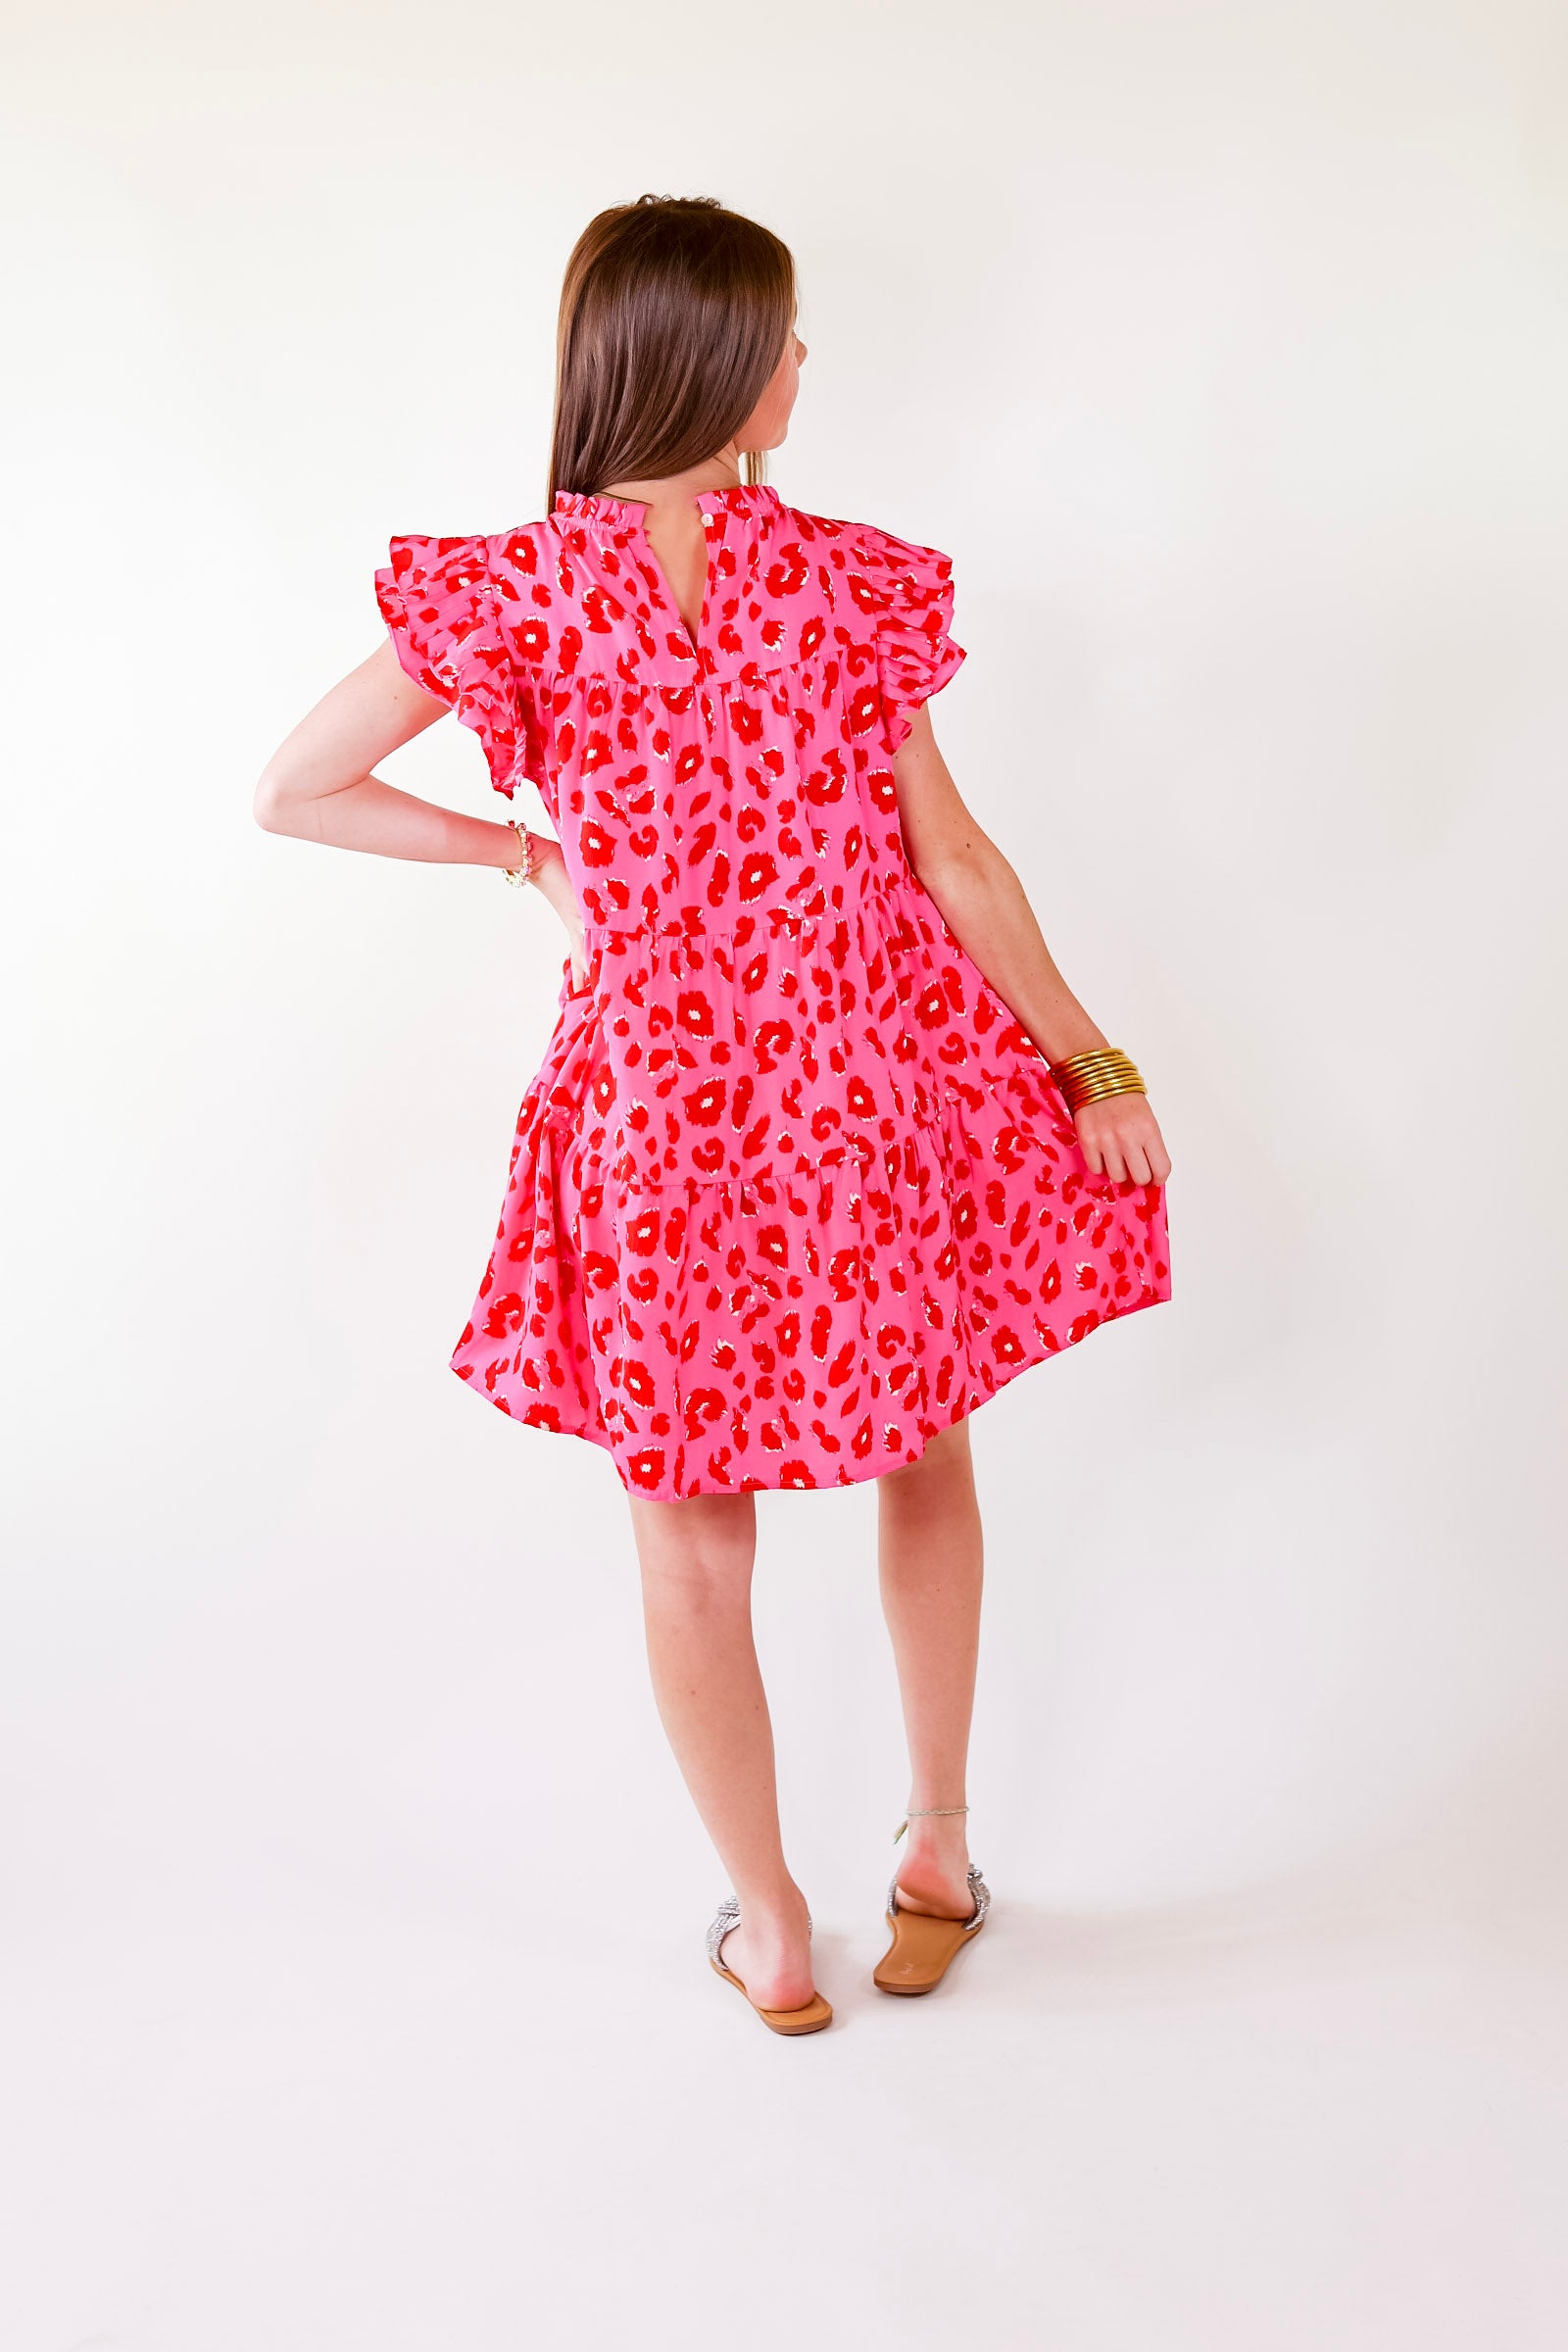 Daring and Delightful Leopard Print Dress with Ruffle Cap Sleeves in Pink - Giddy Up Glamour Boutique